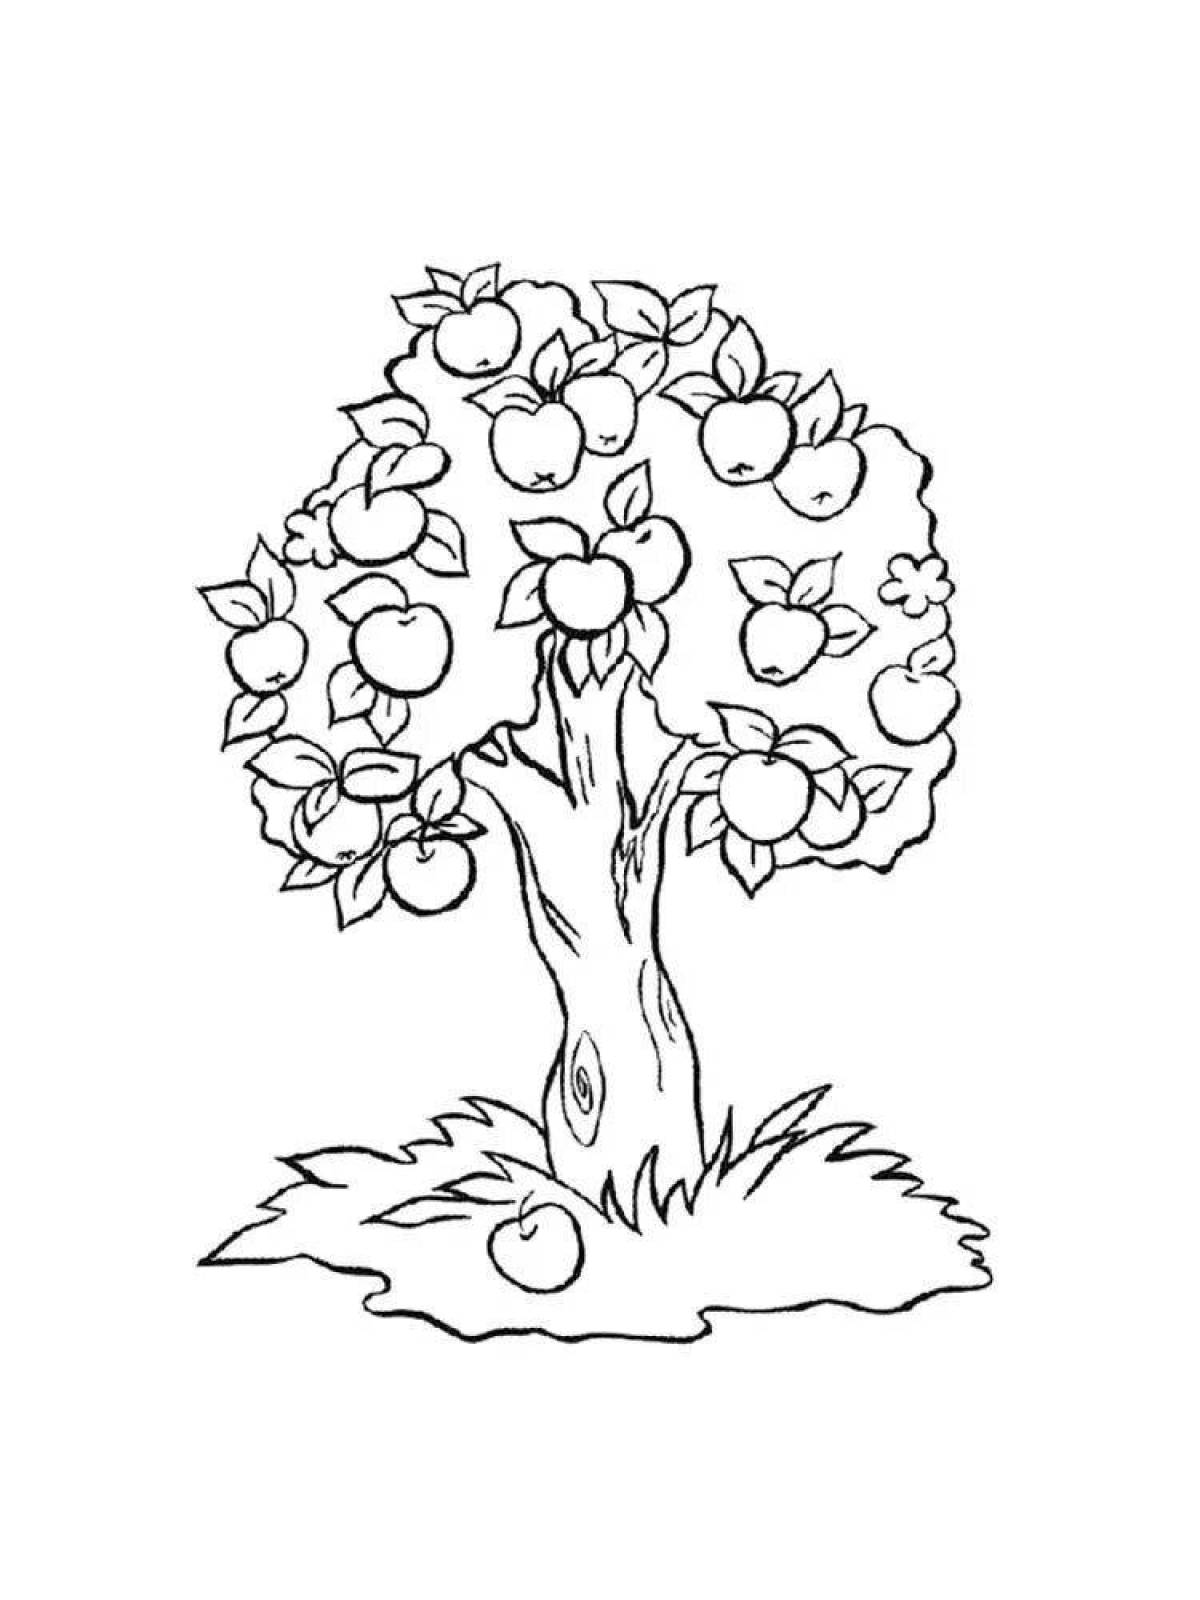 Big tree coloring book with apples